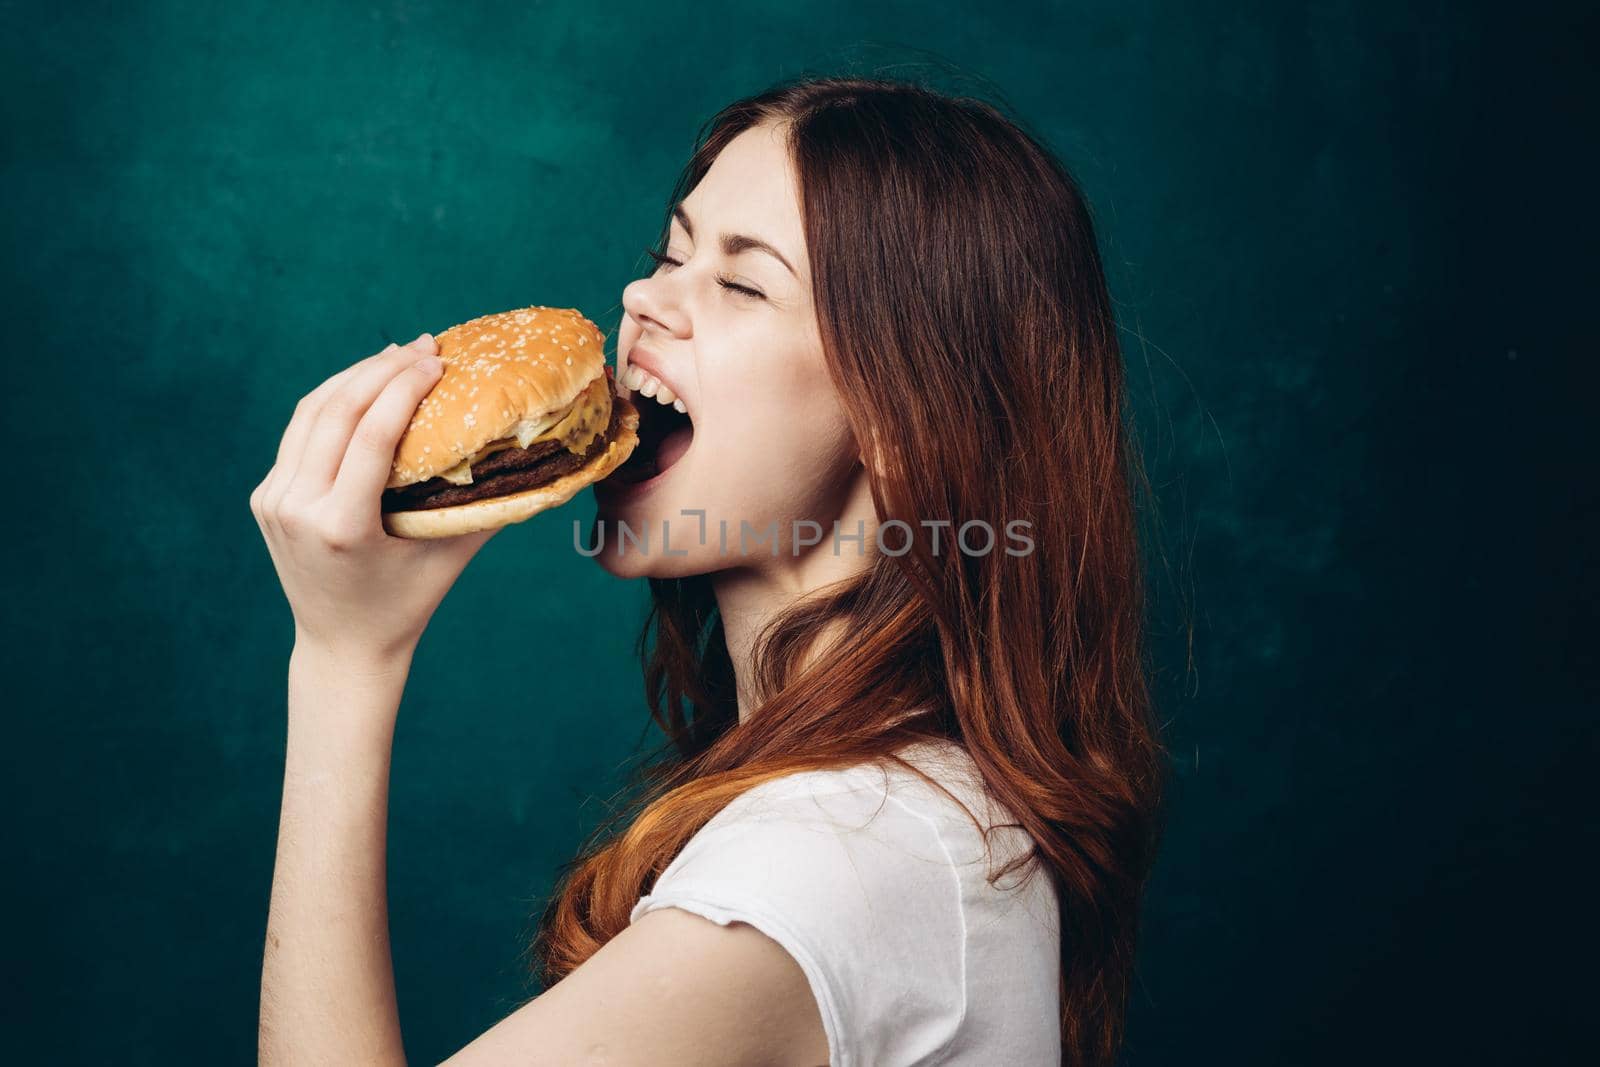 cheerful woman eating hamburger snack close-up lifestyle. High quality photo